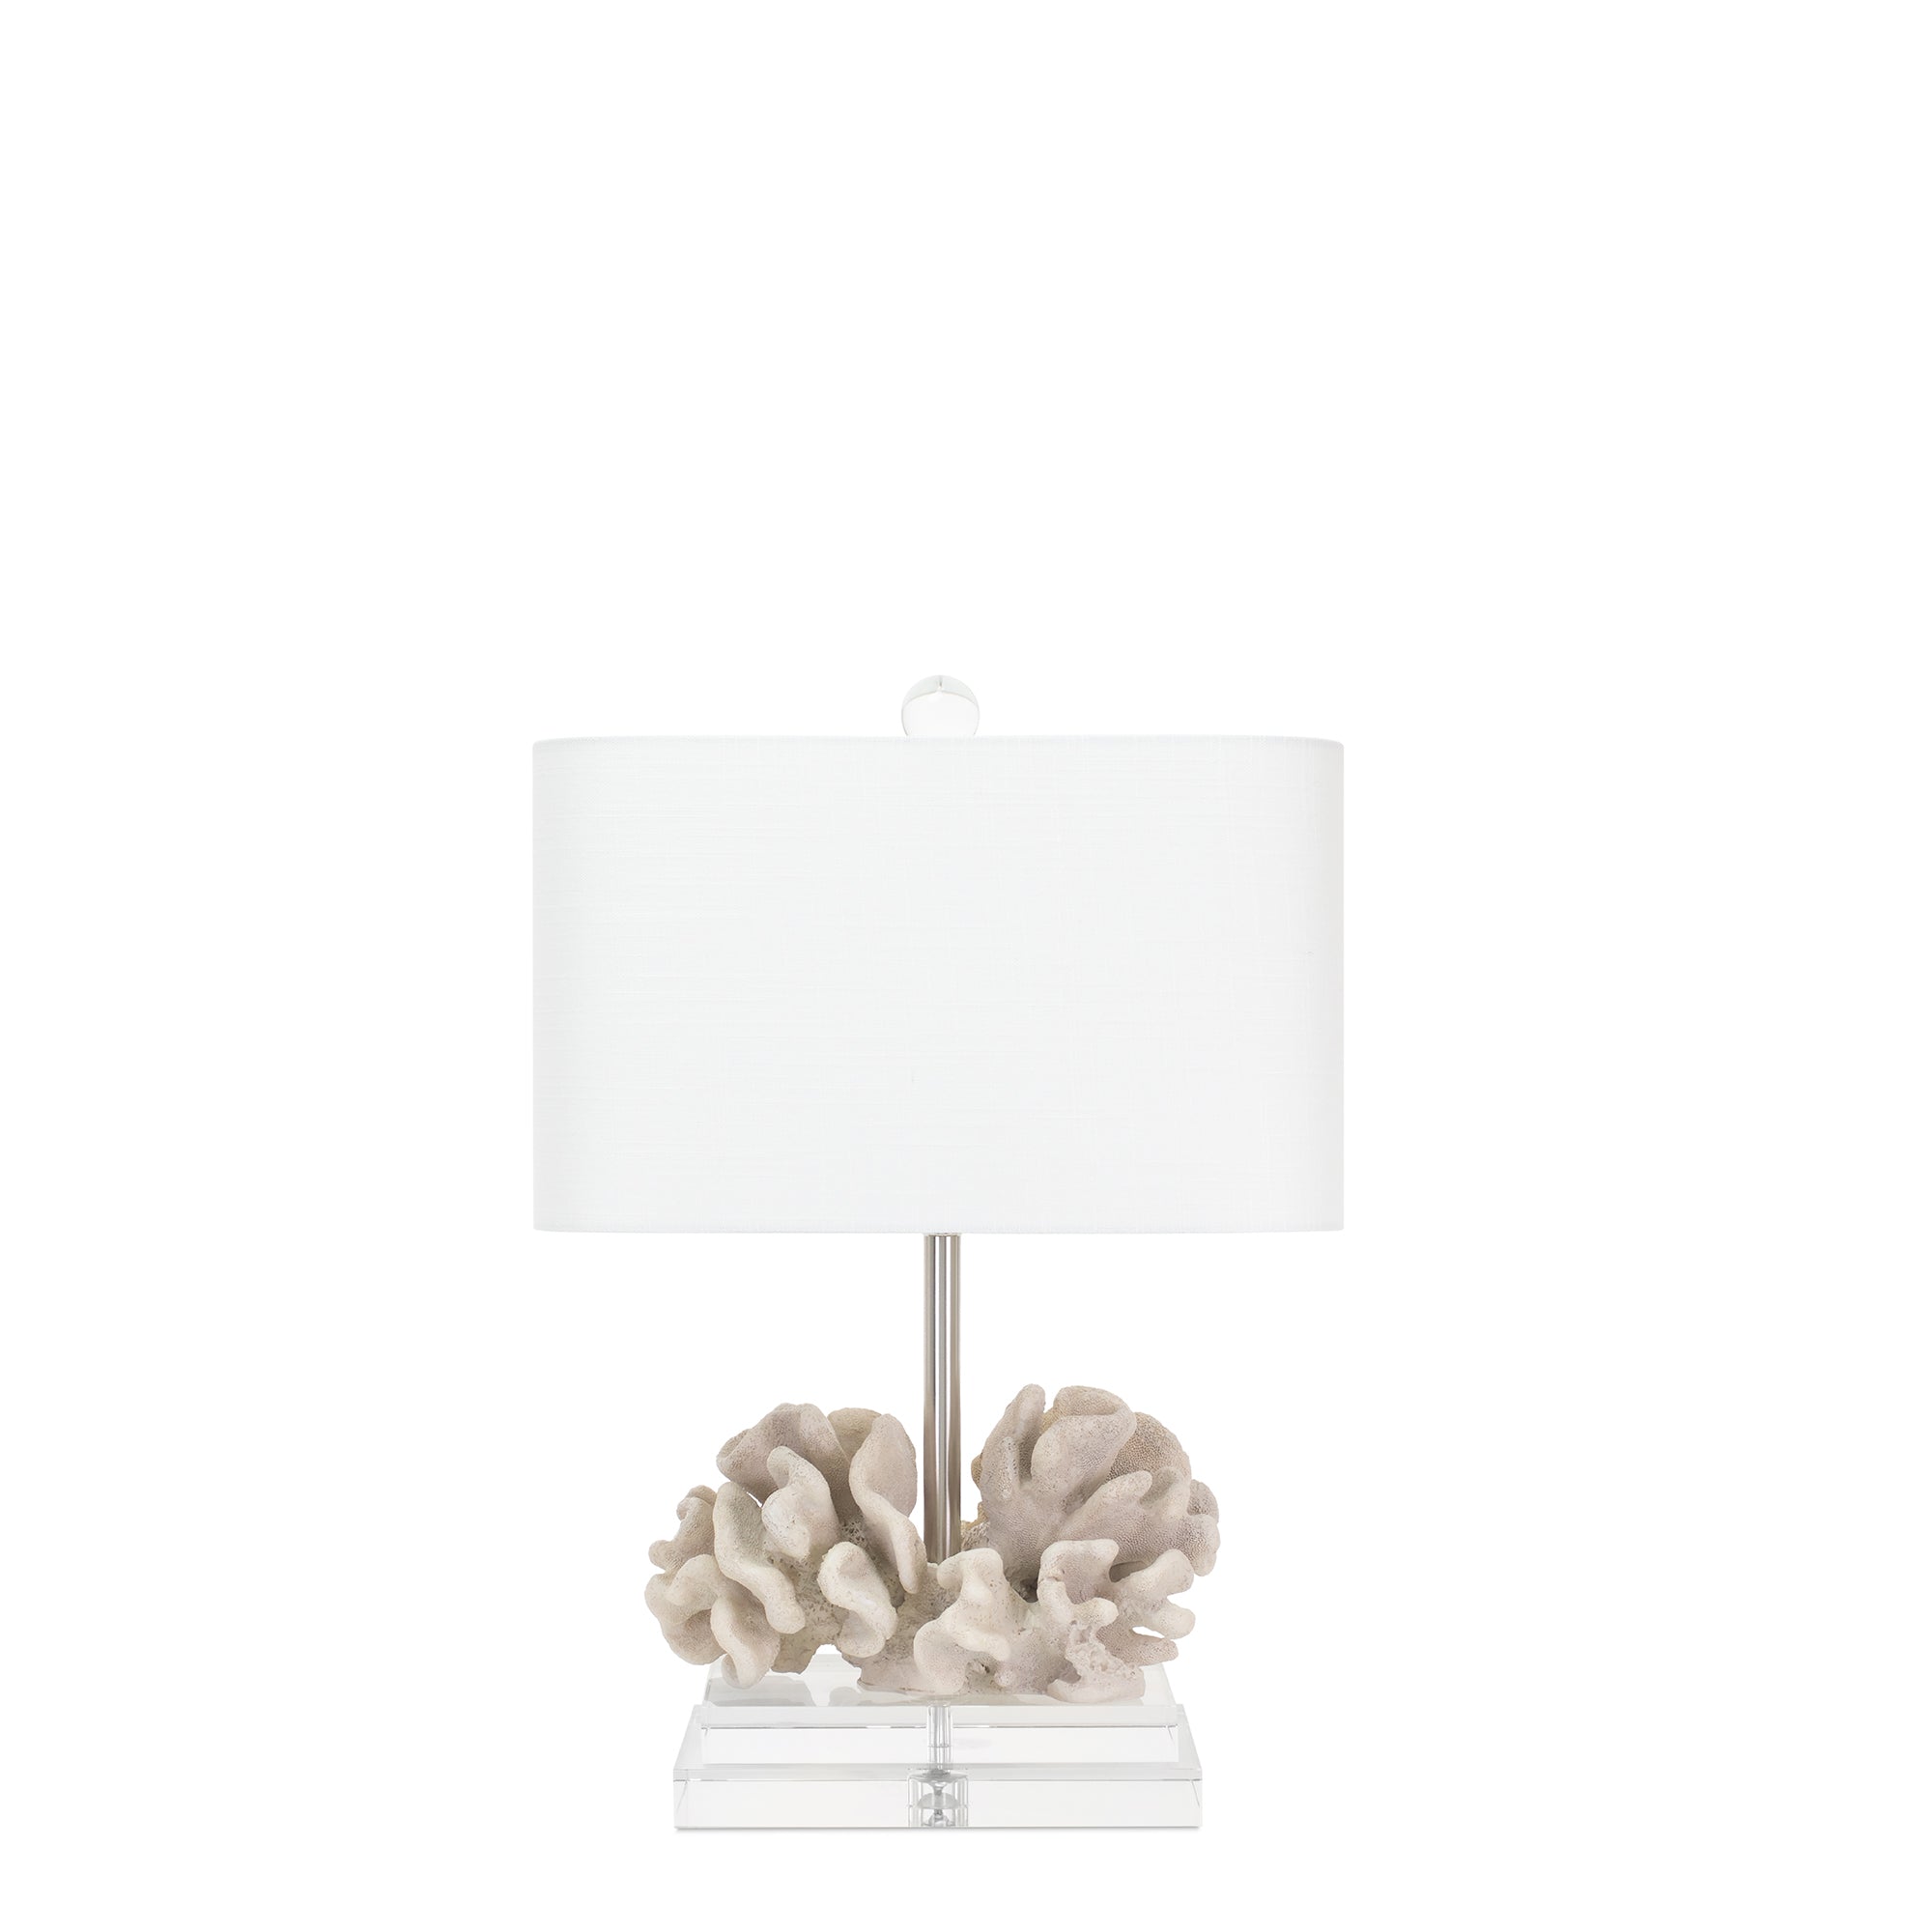 Elkhorn Coral Table Lamp - Couture Lamps